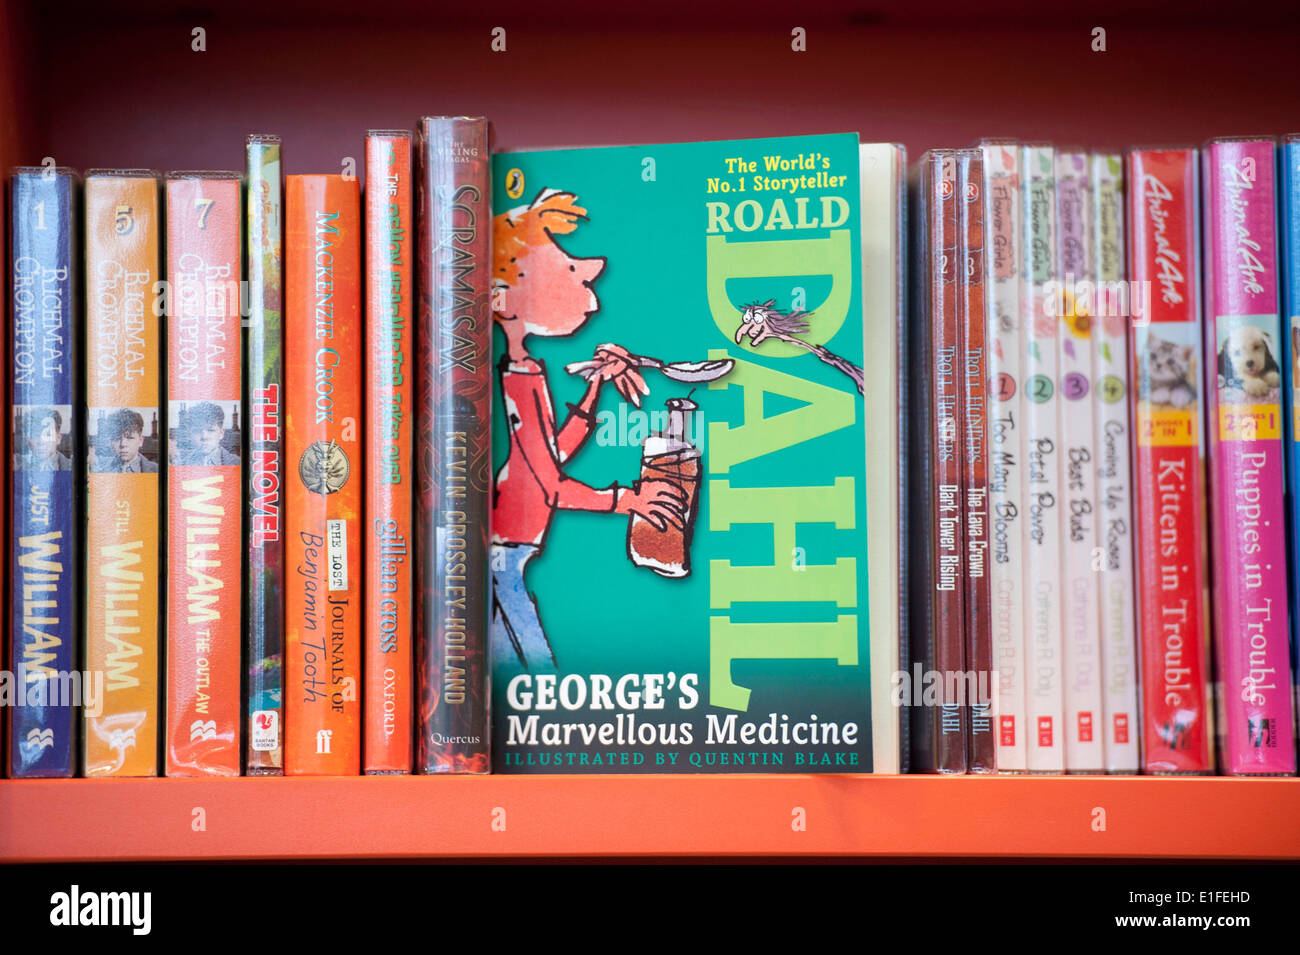 Roald Dahl book names 'George's Marvellous Medicine' on shelf of a library. Stock Photo